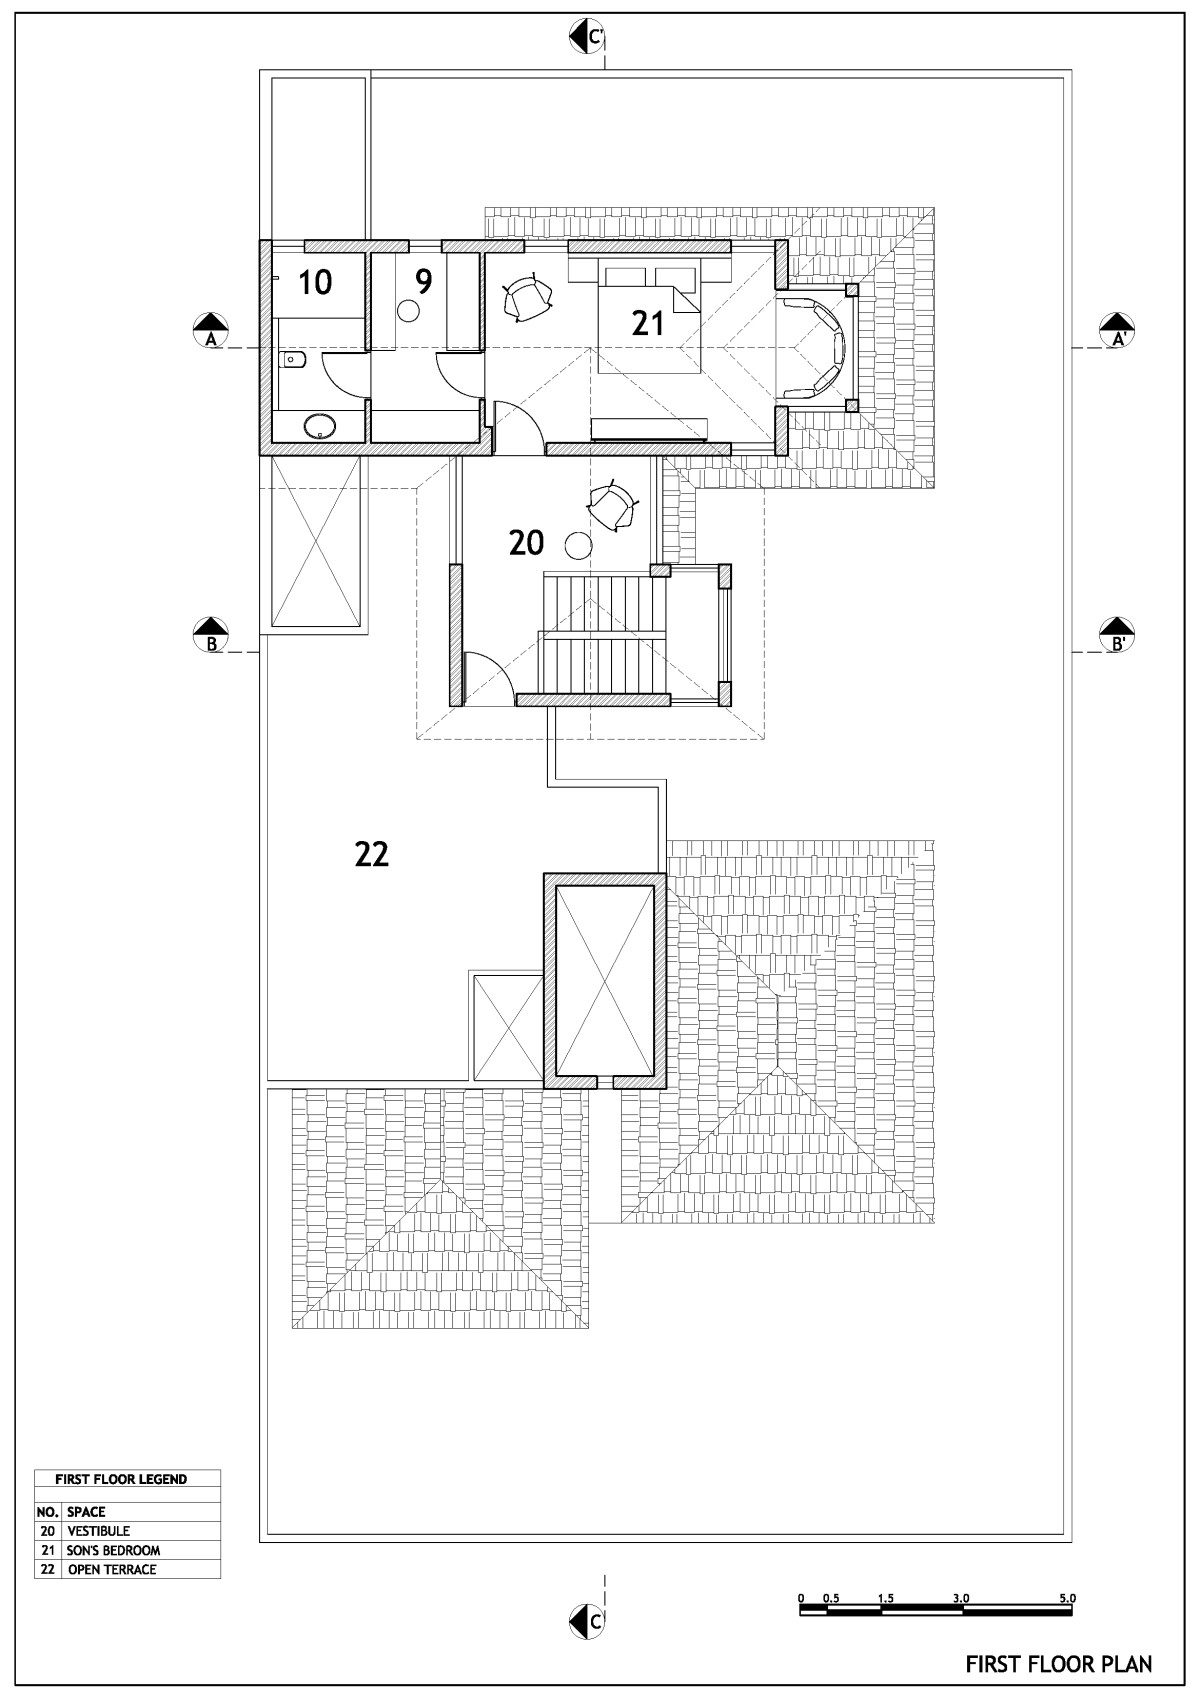 First Floor Plan of Pujara House by Flamingo Architects + Nidhi Thacker and Associates